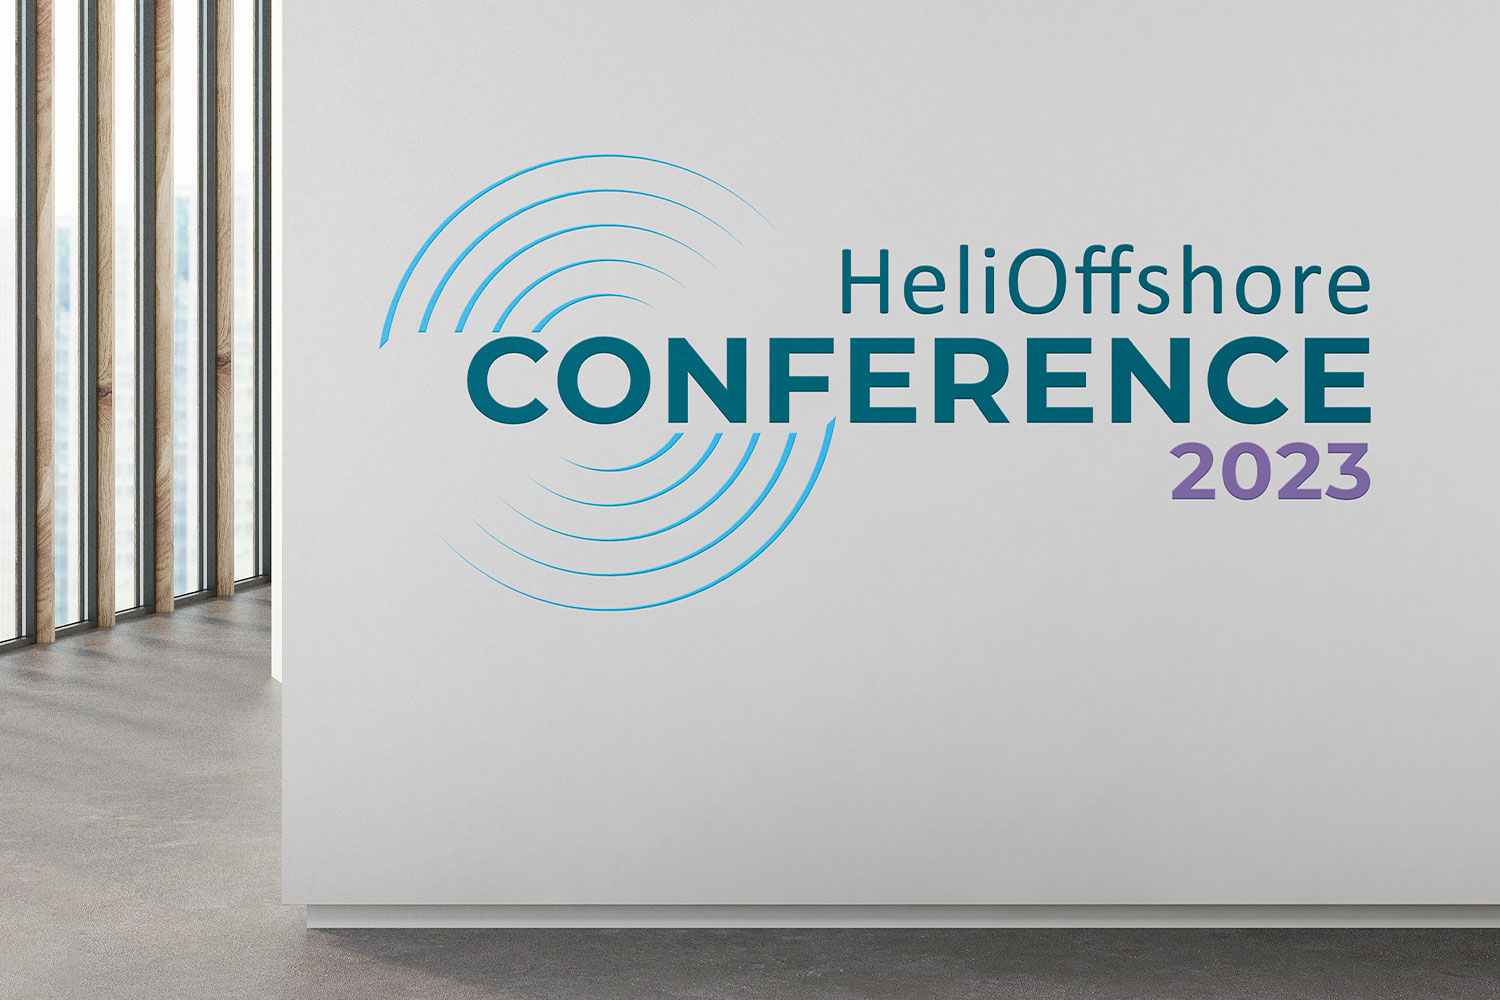 HeliOffshore Conference logo design by Avid Creative Hampshire